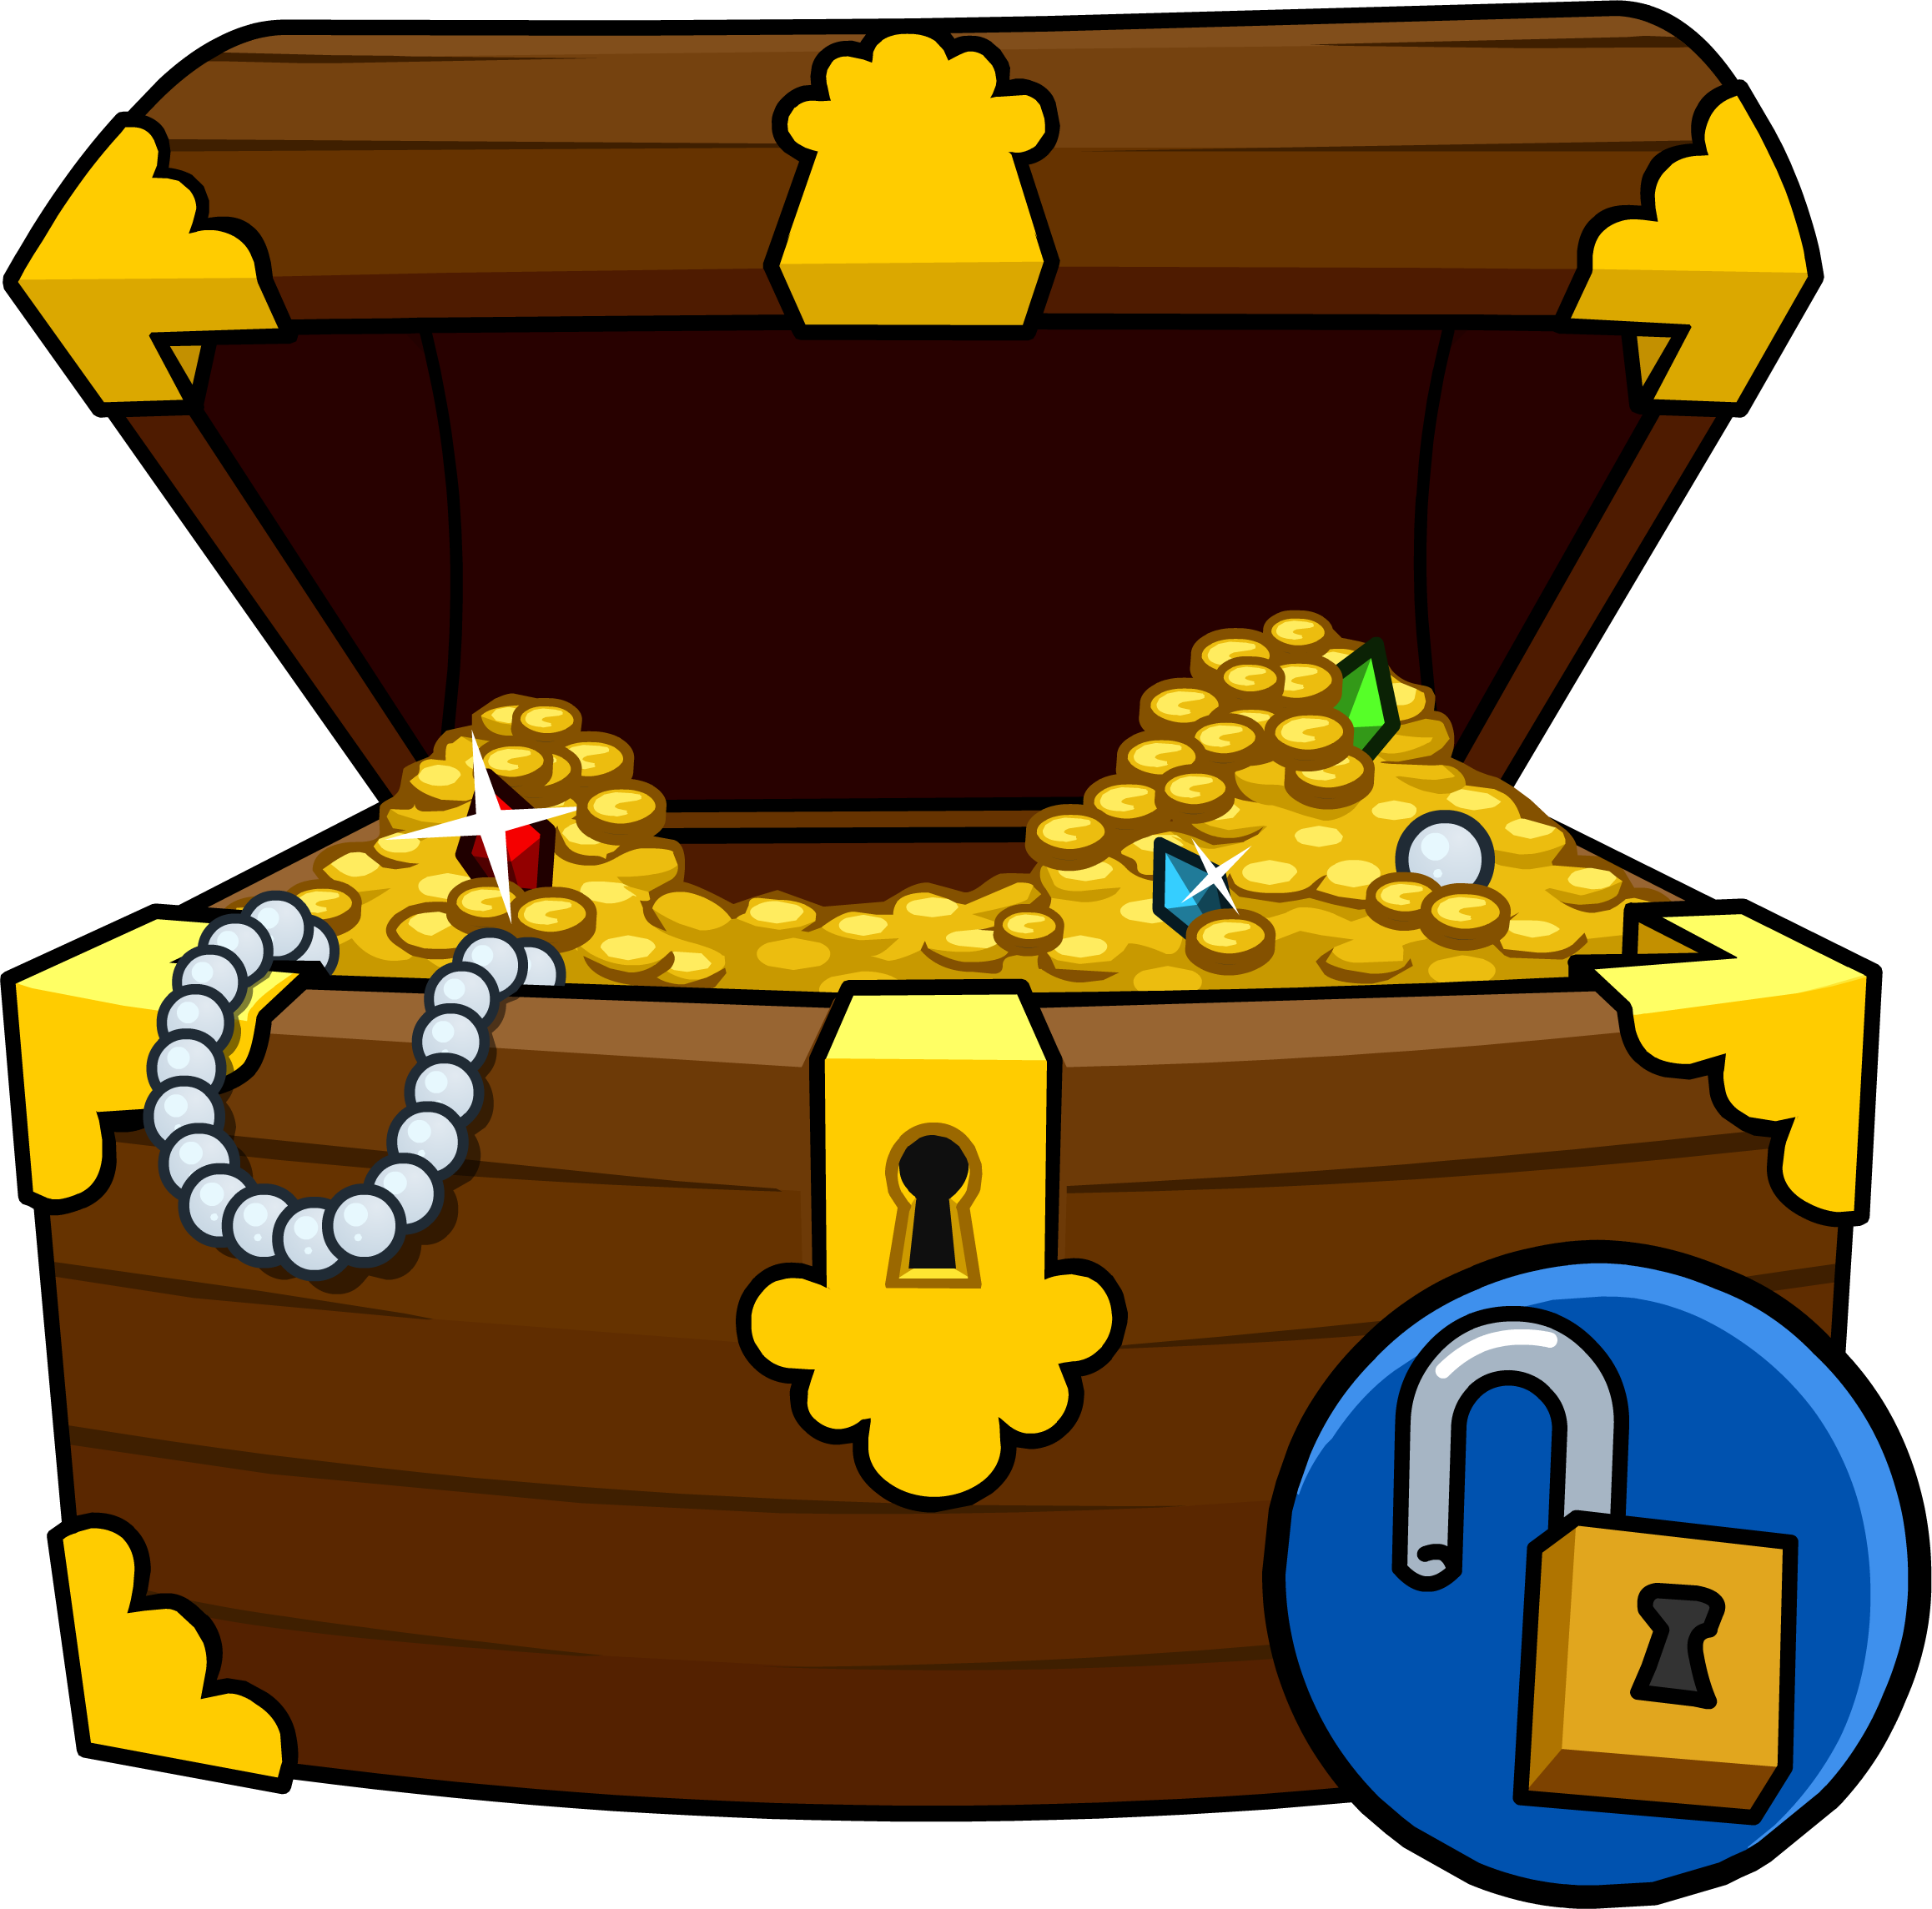 Introducing Pictures Of Treasure Chests Chest Costume - Pirate Treasure Chest Clipart (2316x2289)